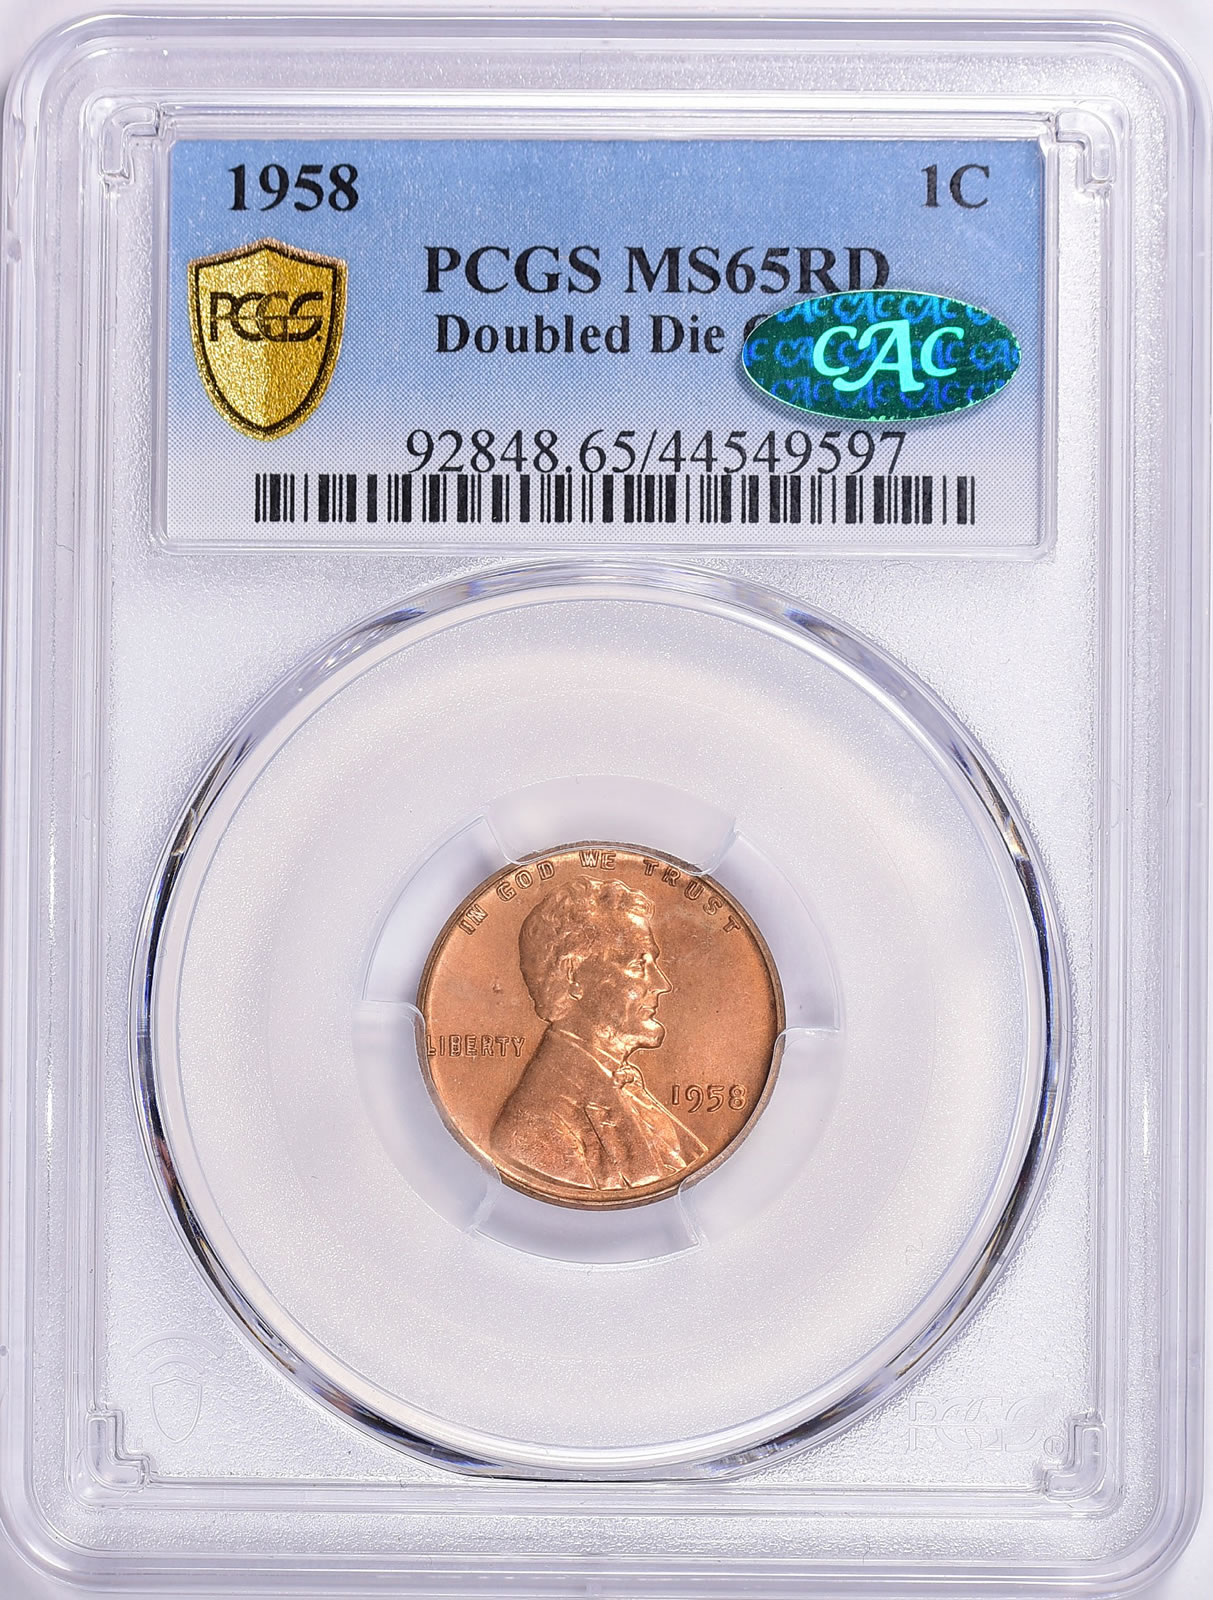 Lincoln Cent Collection Realizes $7.7 Million